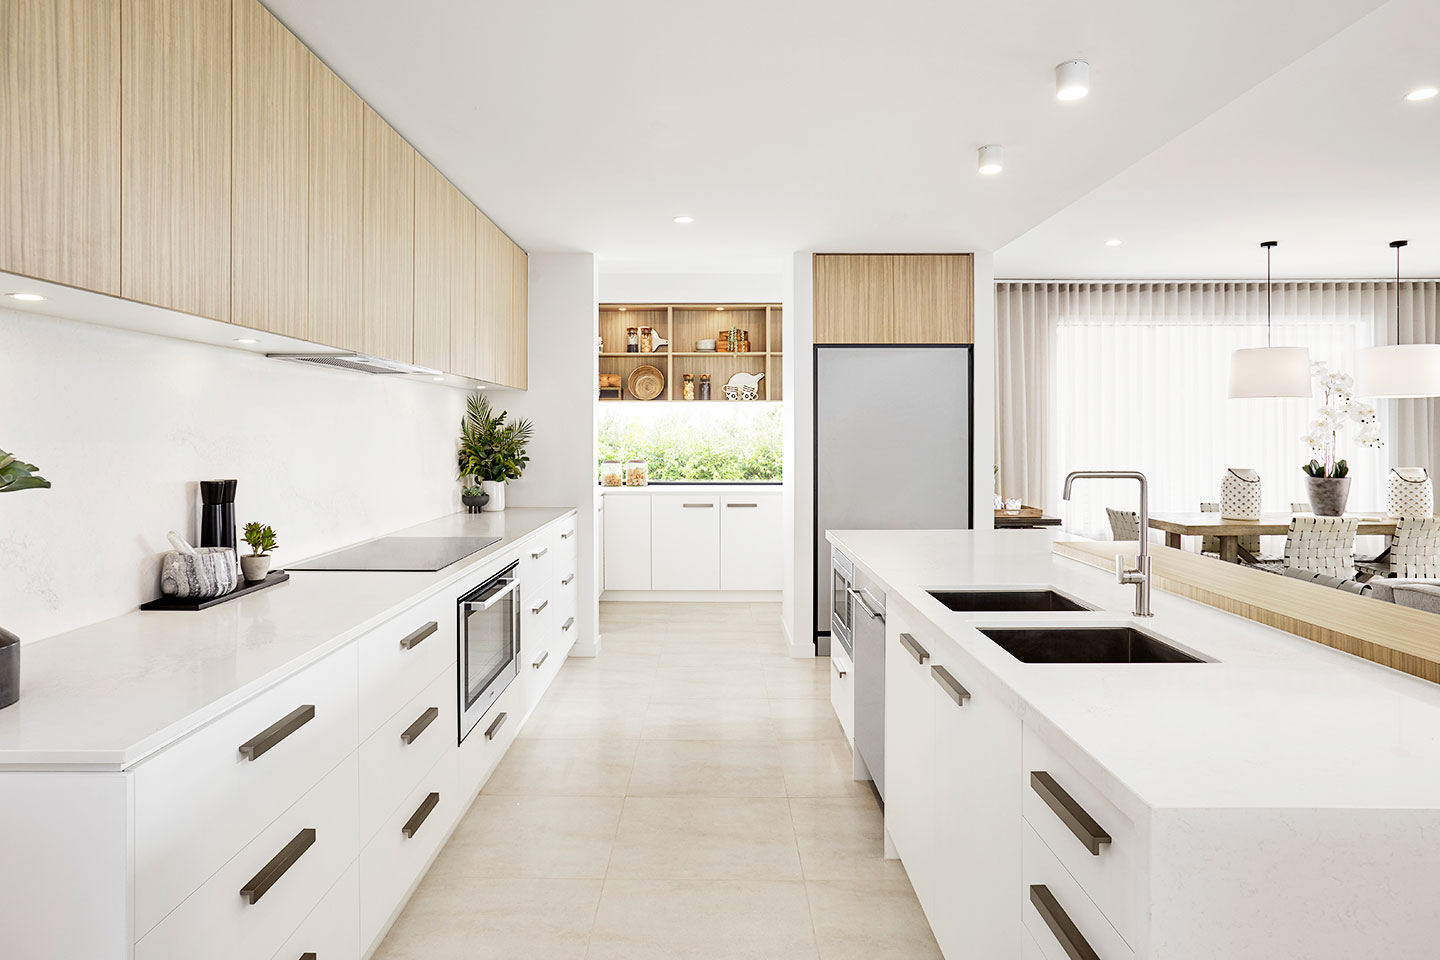 picture of a just remoded kitchen with white walls and white cabnets